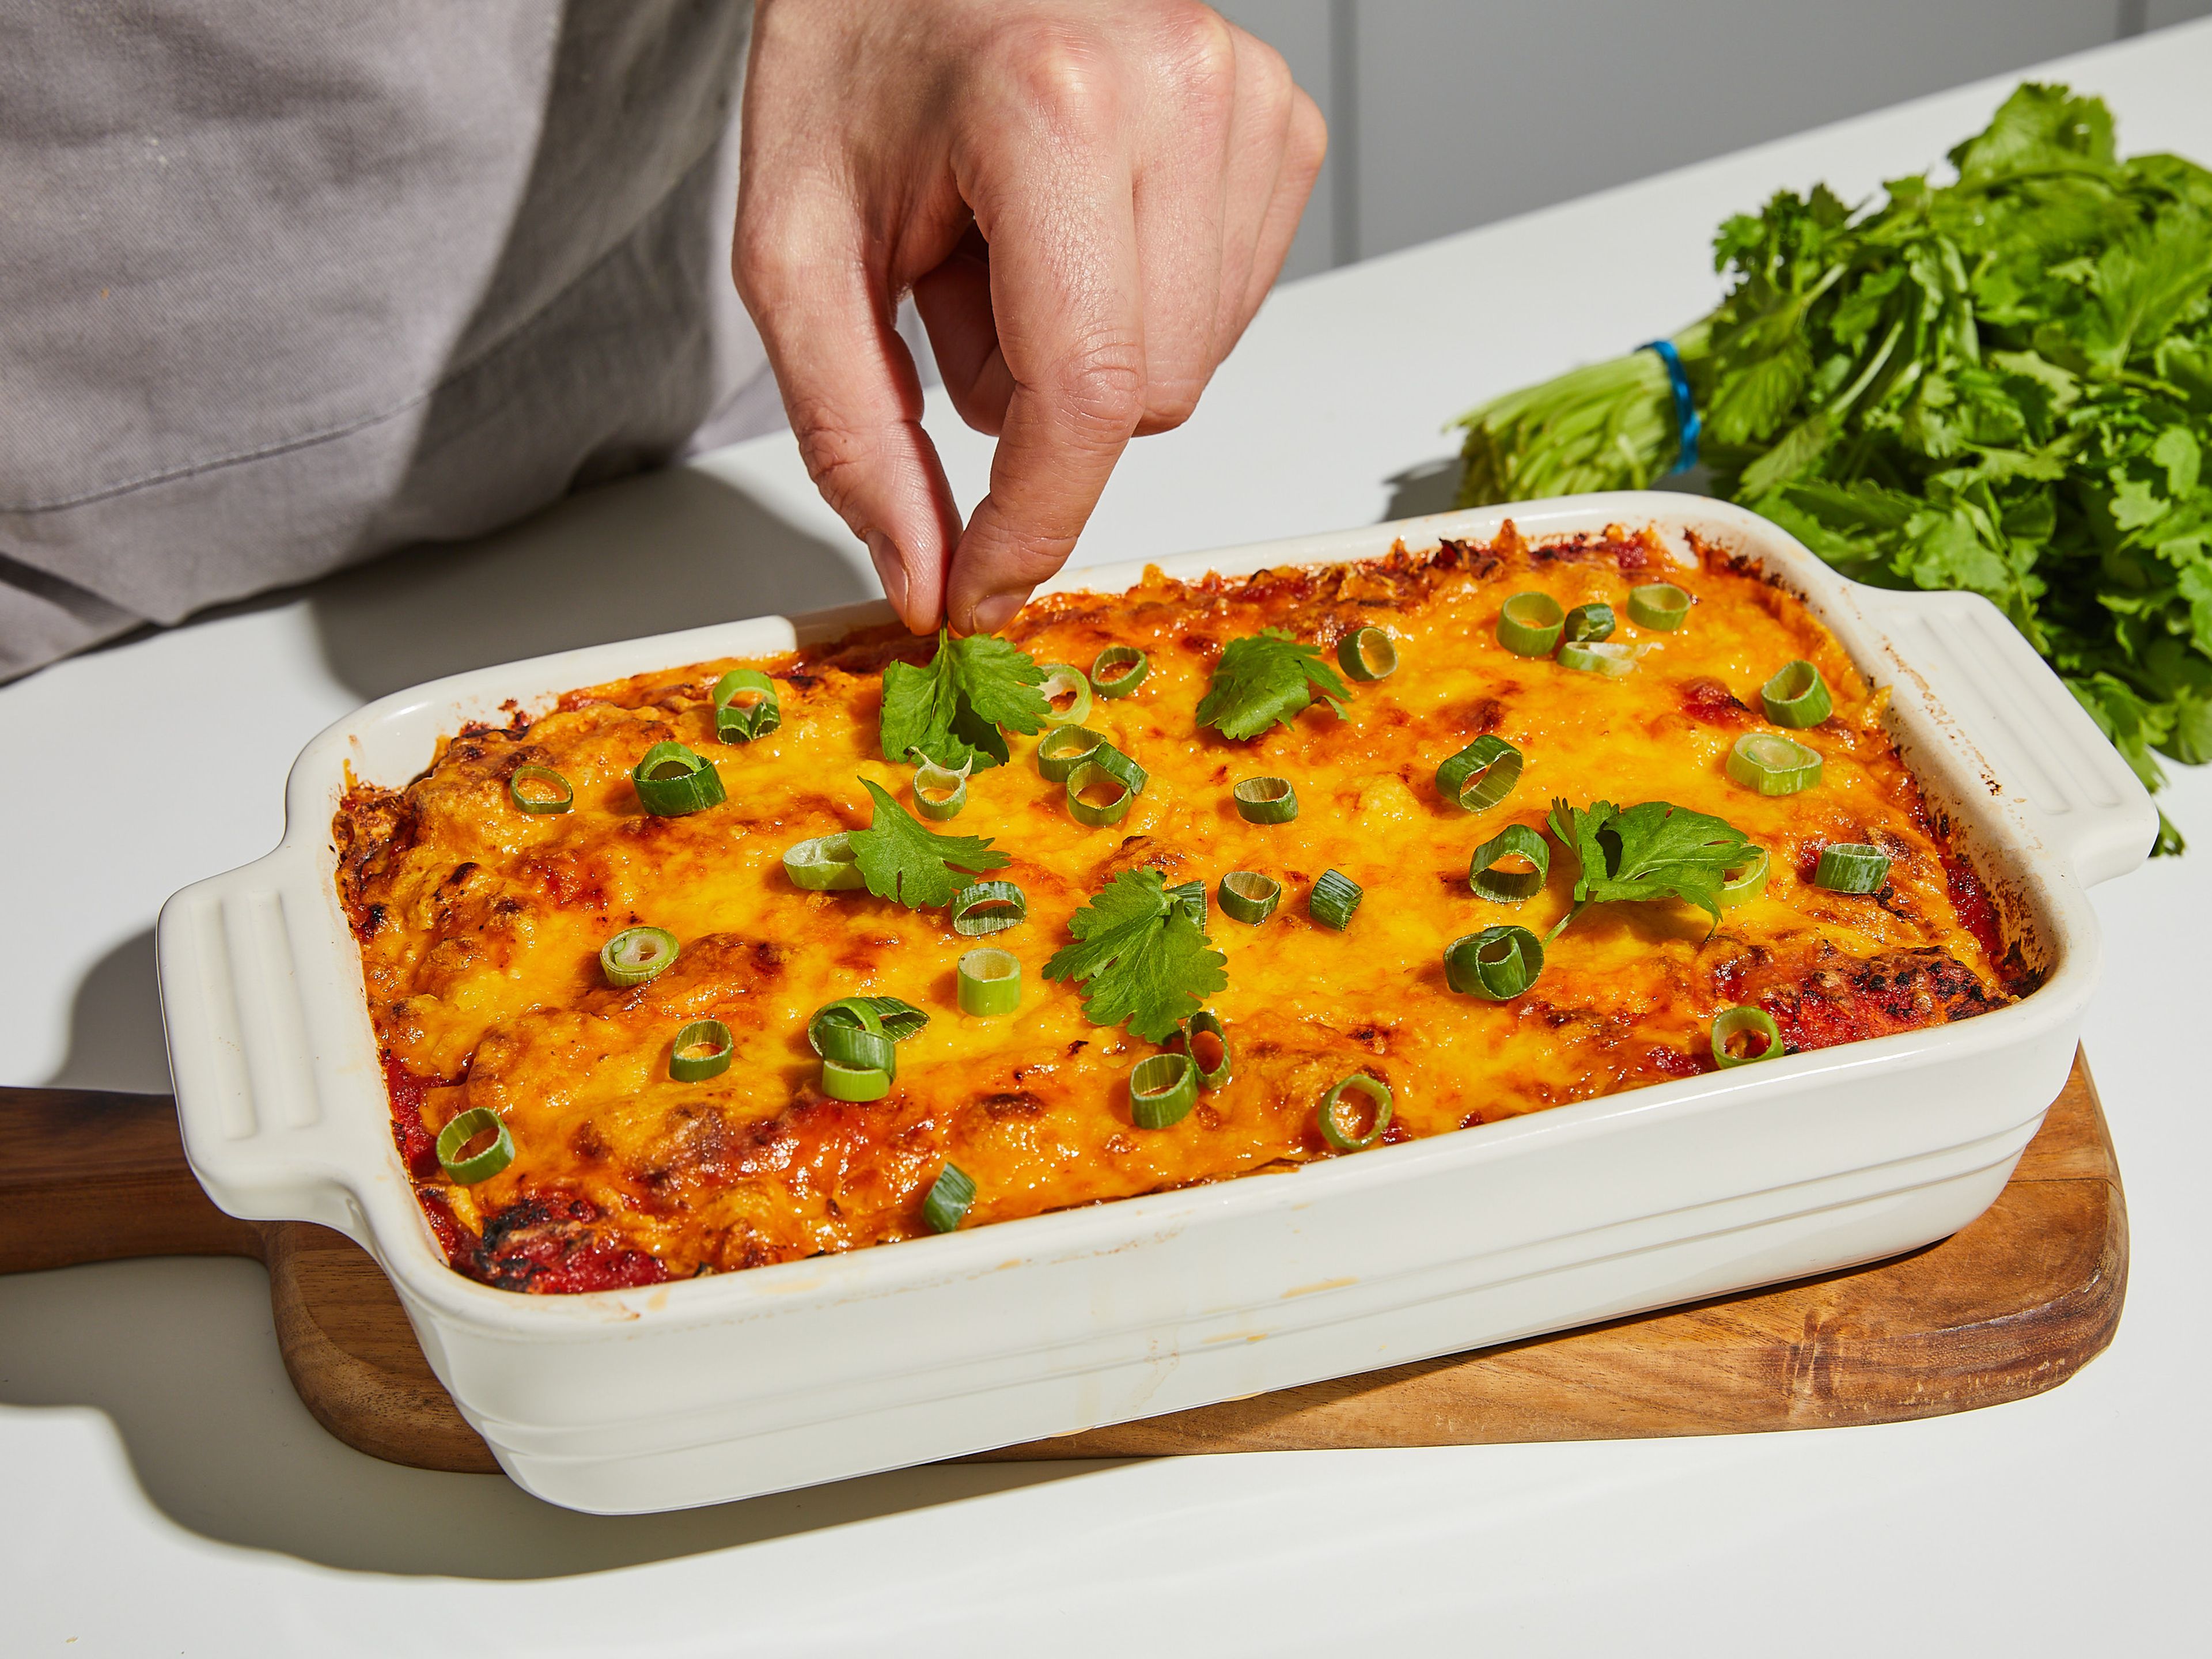 Bake the enchiladas for approx. 15–20 min., or until the cheese has melted and turns golden brown. Garnish with the green of the spring onion and chopped cilantro. Serve with sour cream.